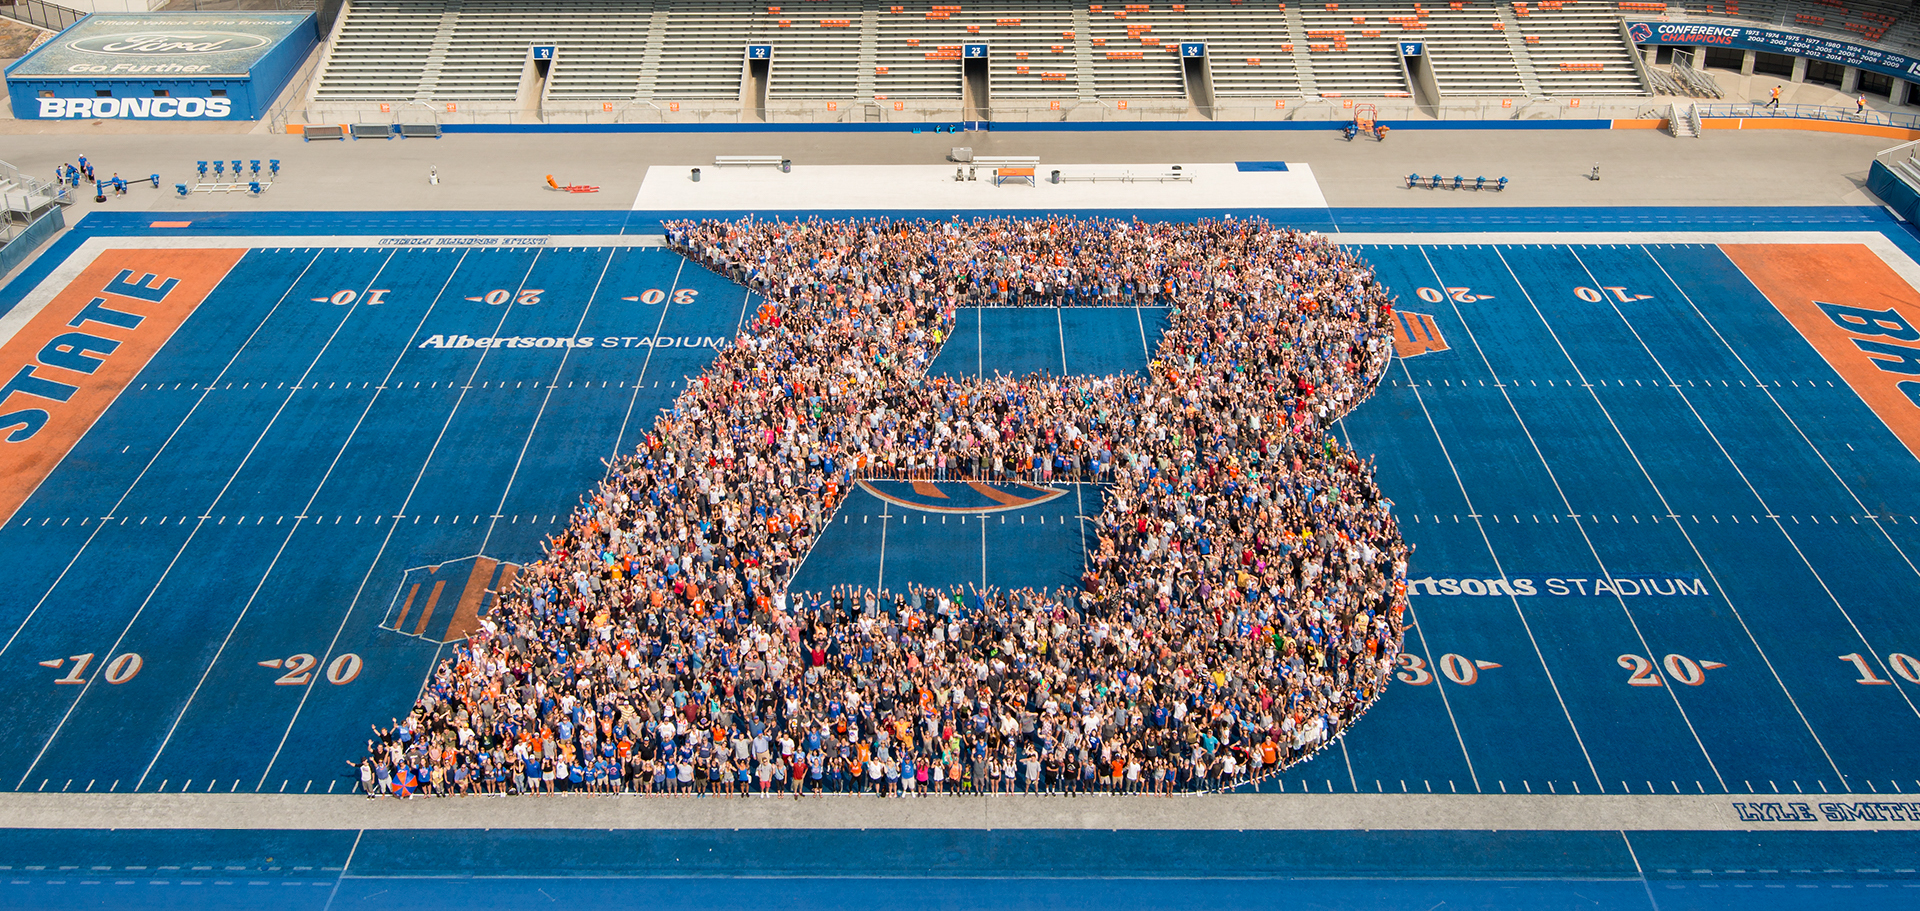 Students organized in the shape of a B on the Boise State football field